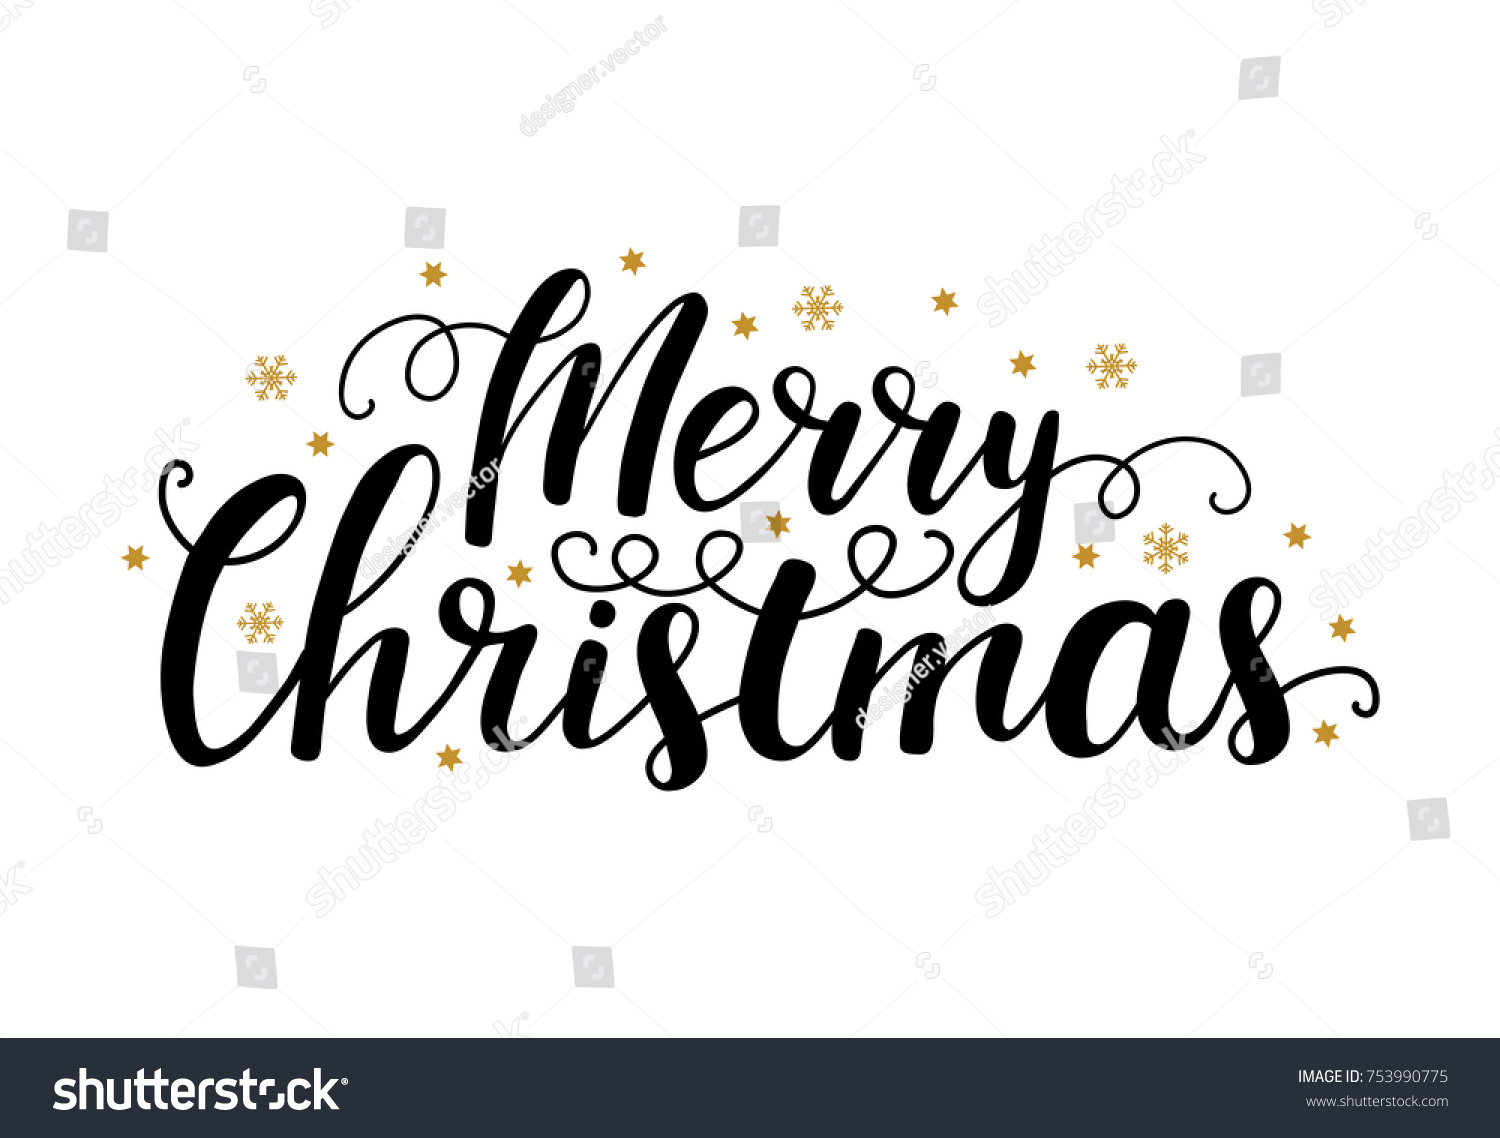 Merry christmas Vector hand drawn lettering